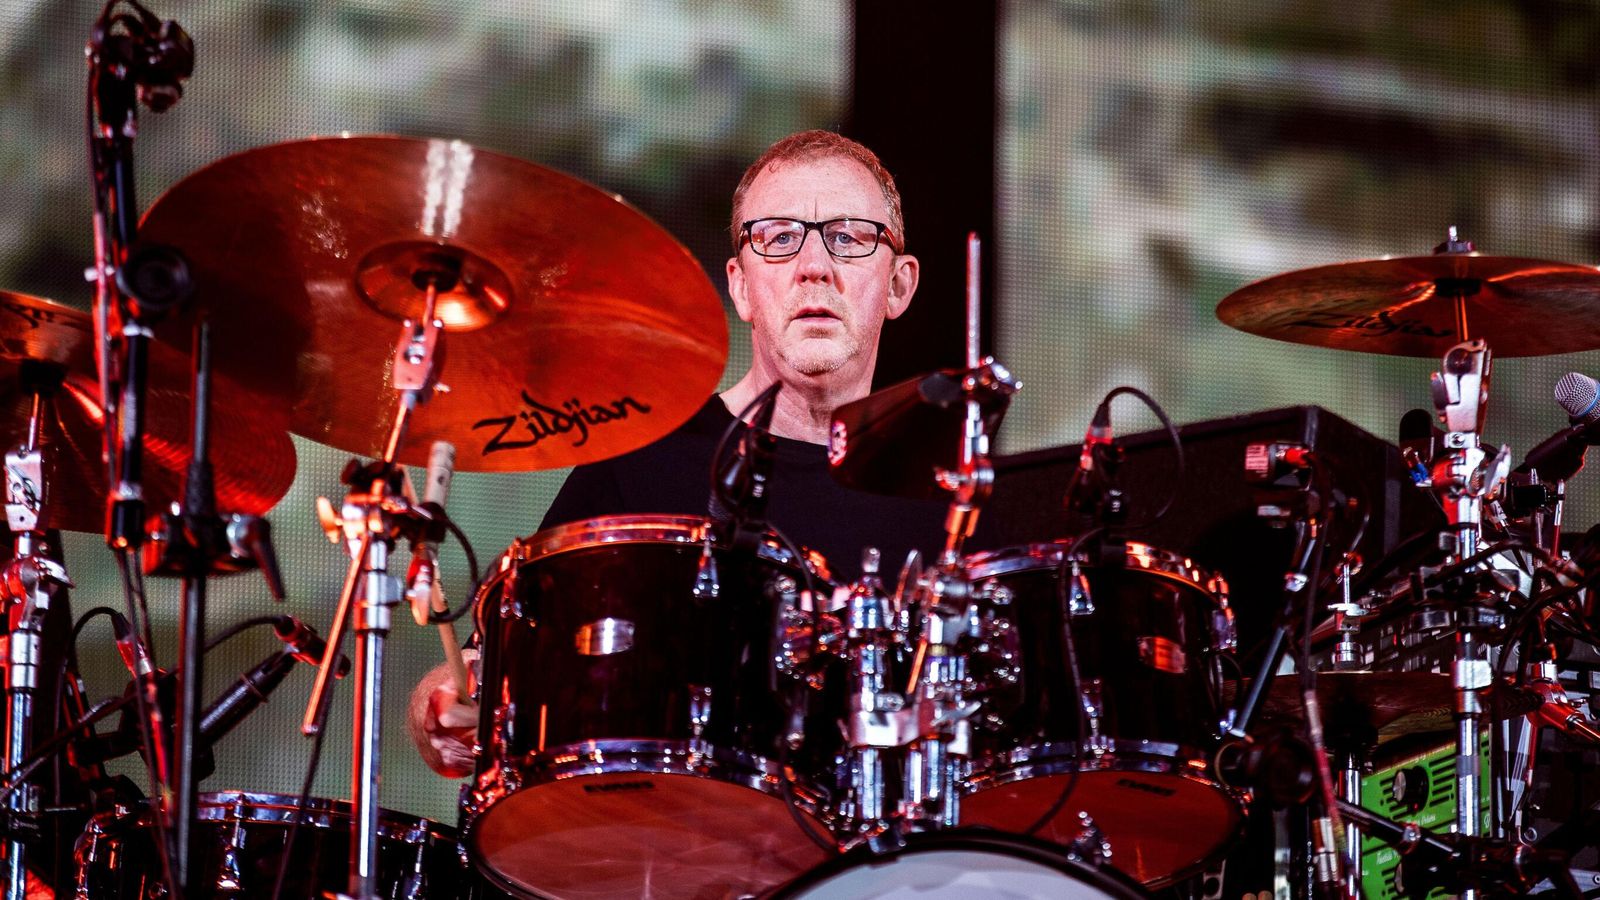 Blur drummer Dave Rowntree selected as Labour candidate